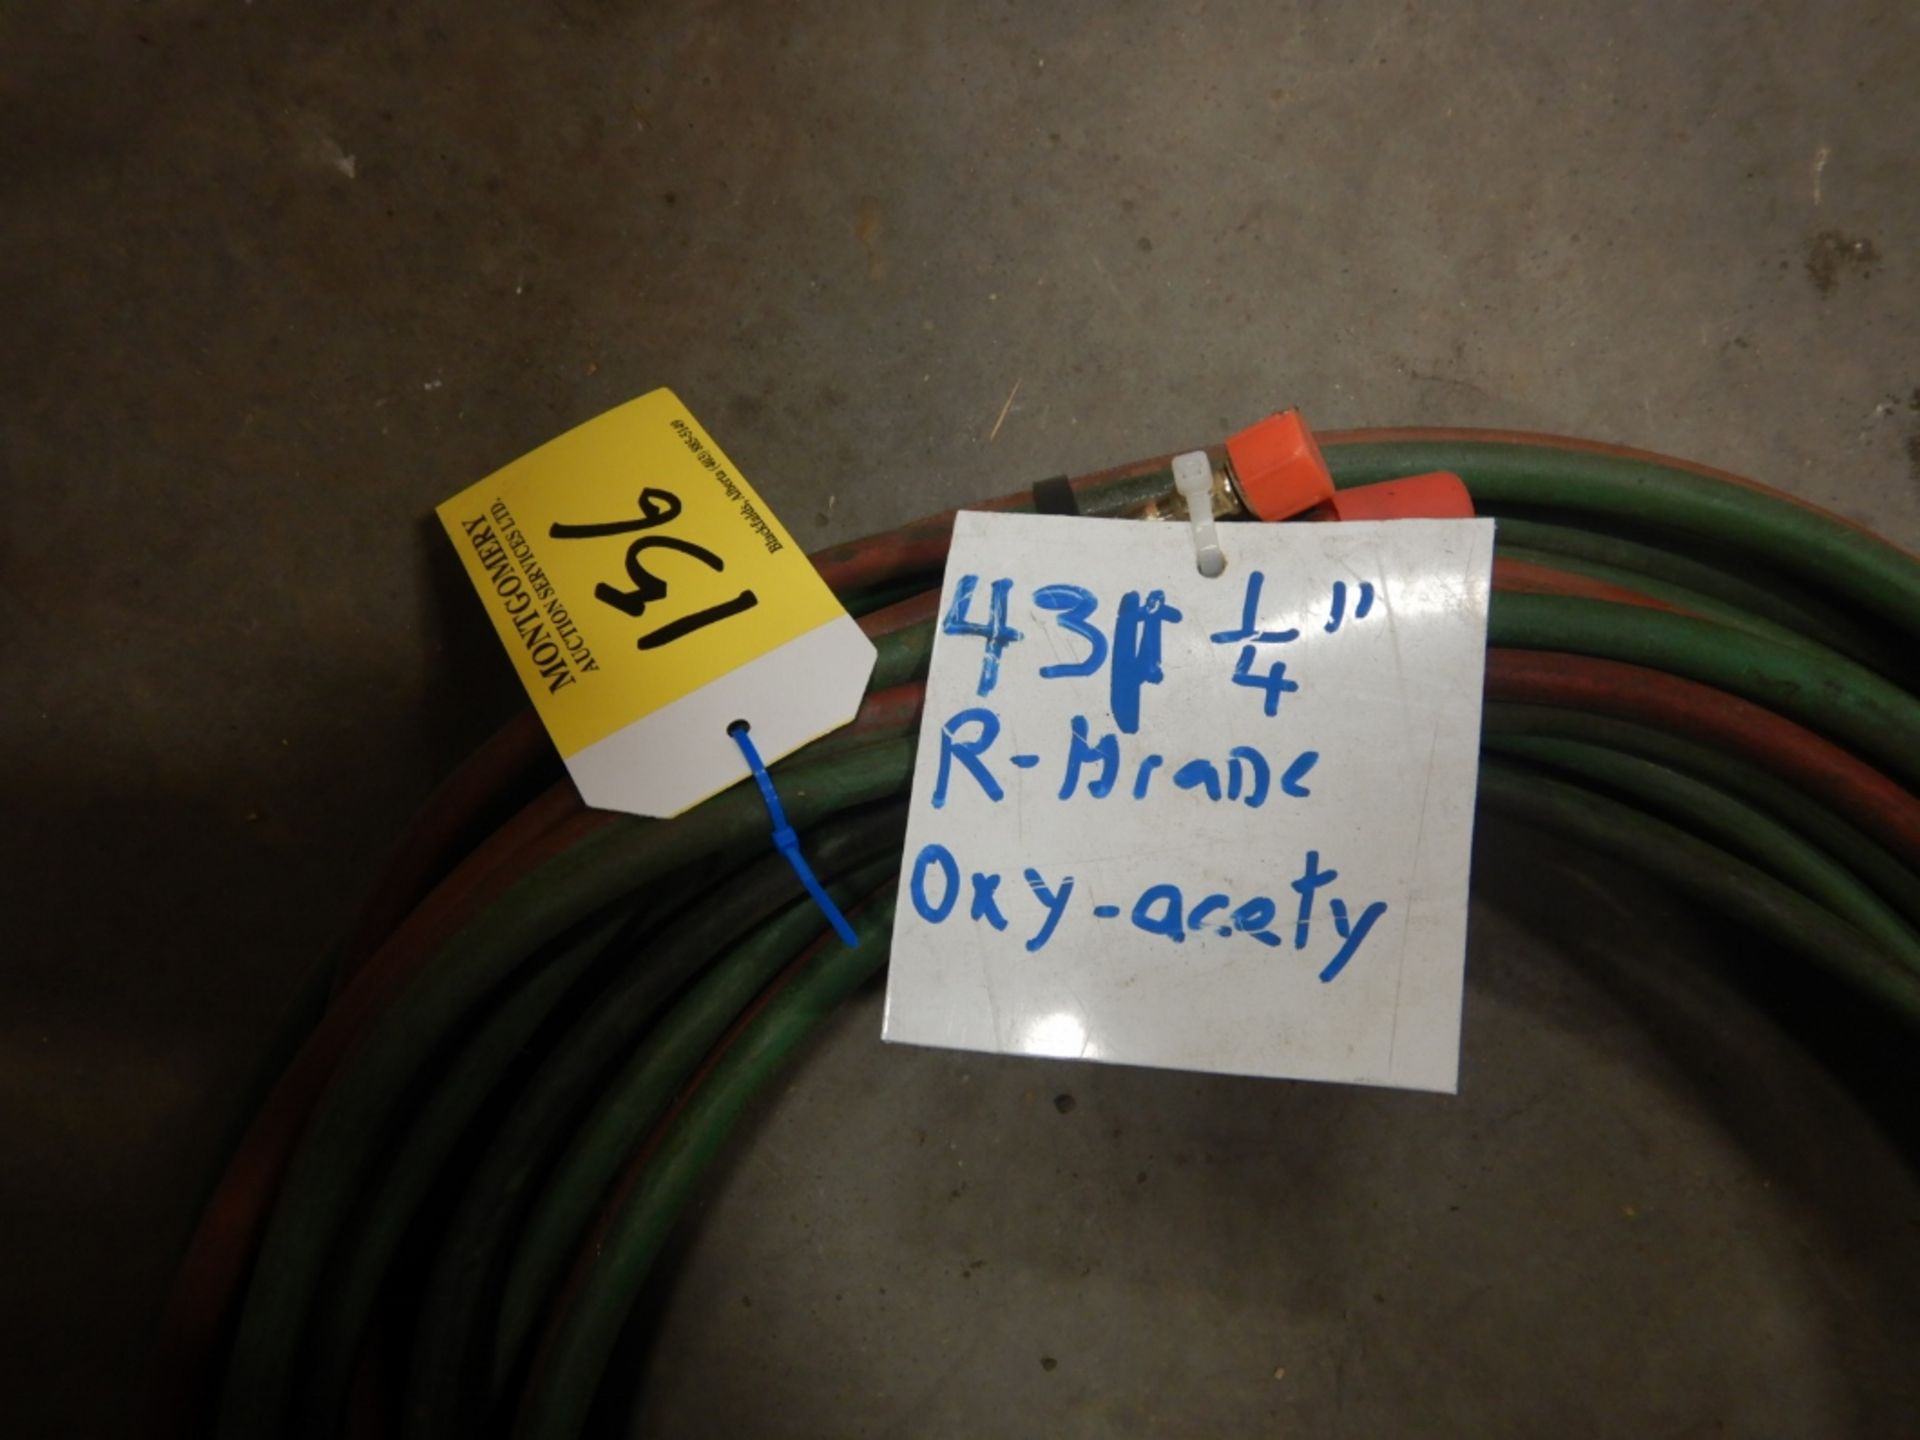 43FT 1/4 INCH R GRADE OXY/ACC HOSE - Image 2 of 2